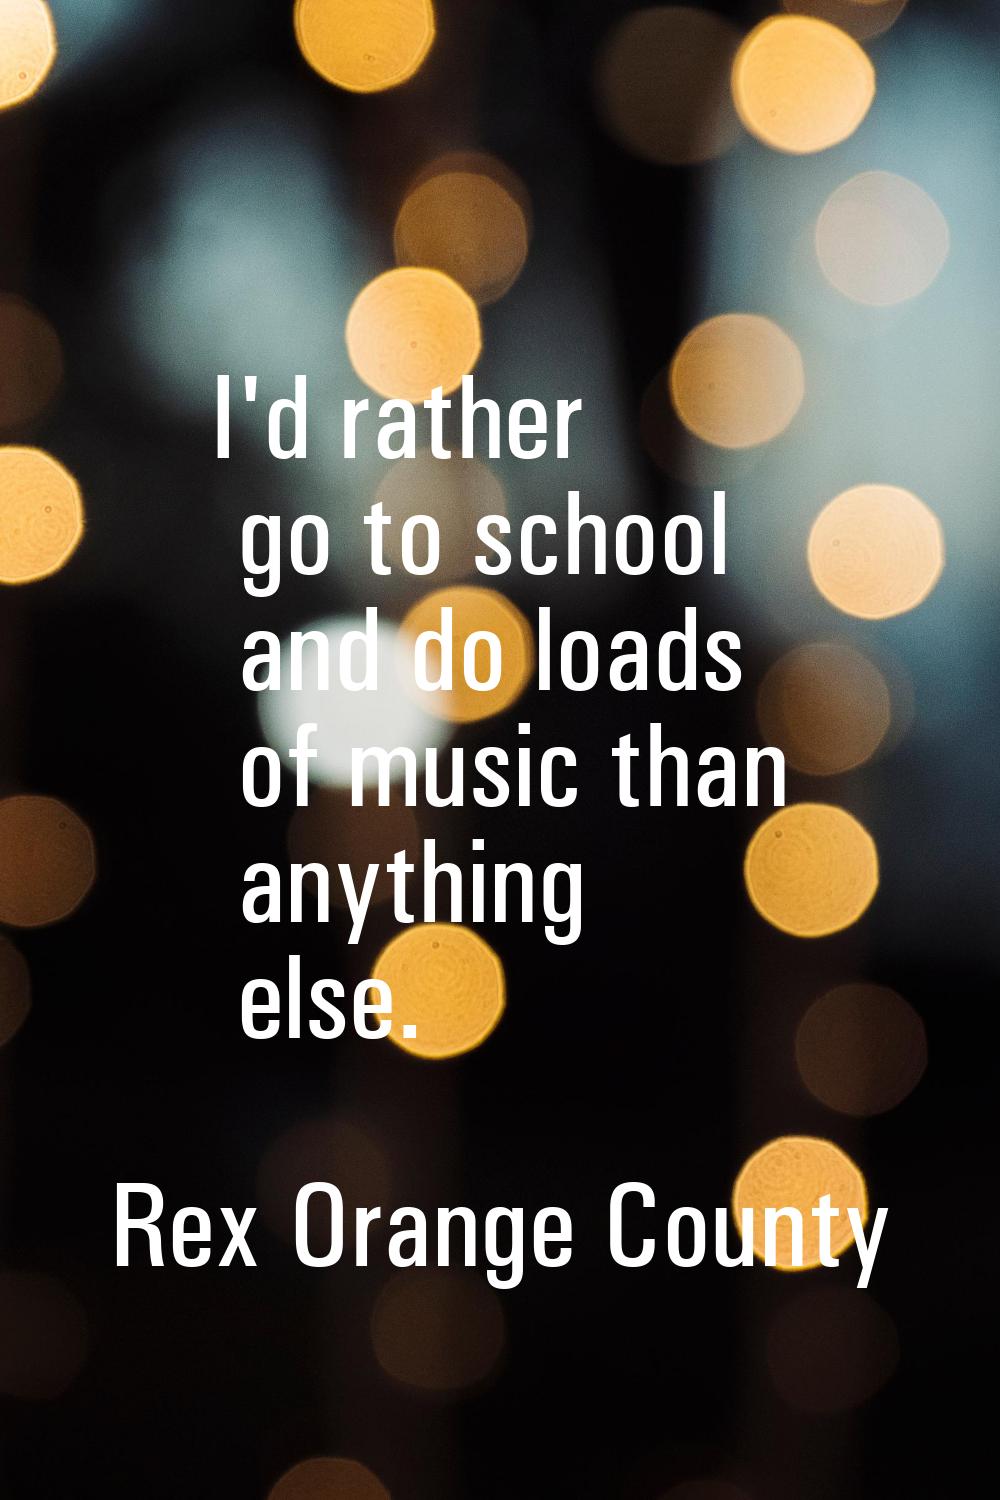 I'd rather go to school and do loads of music than anything else.